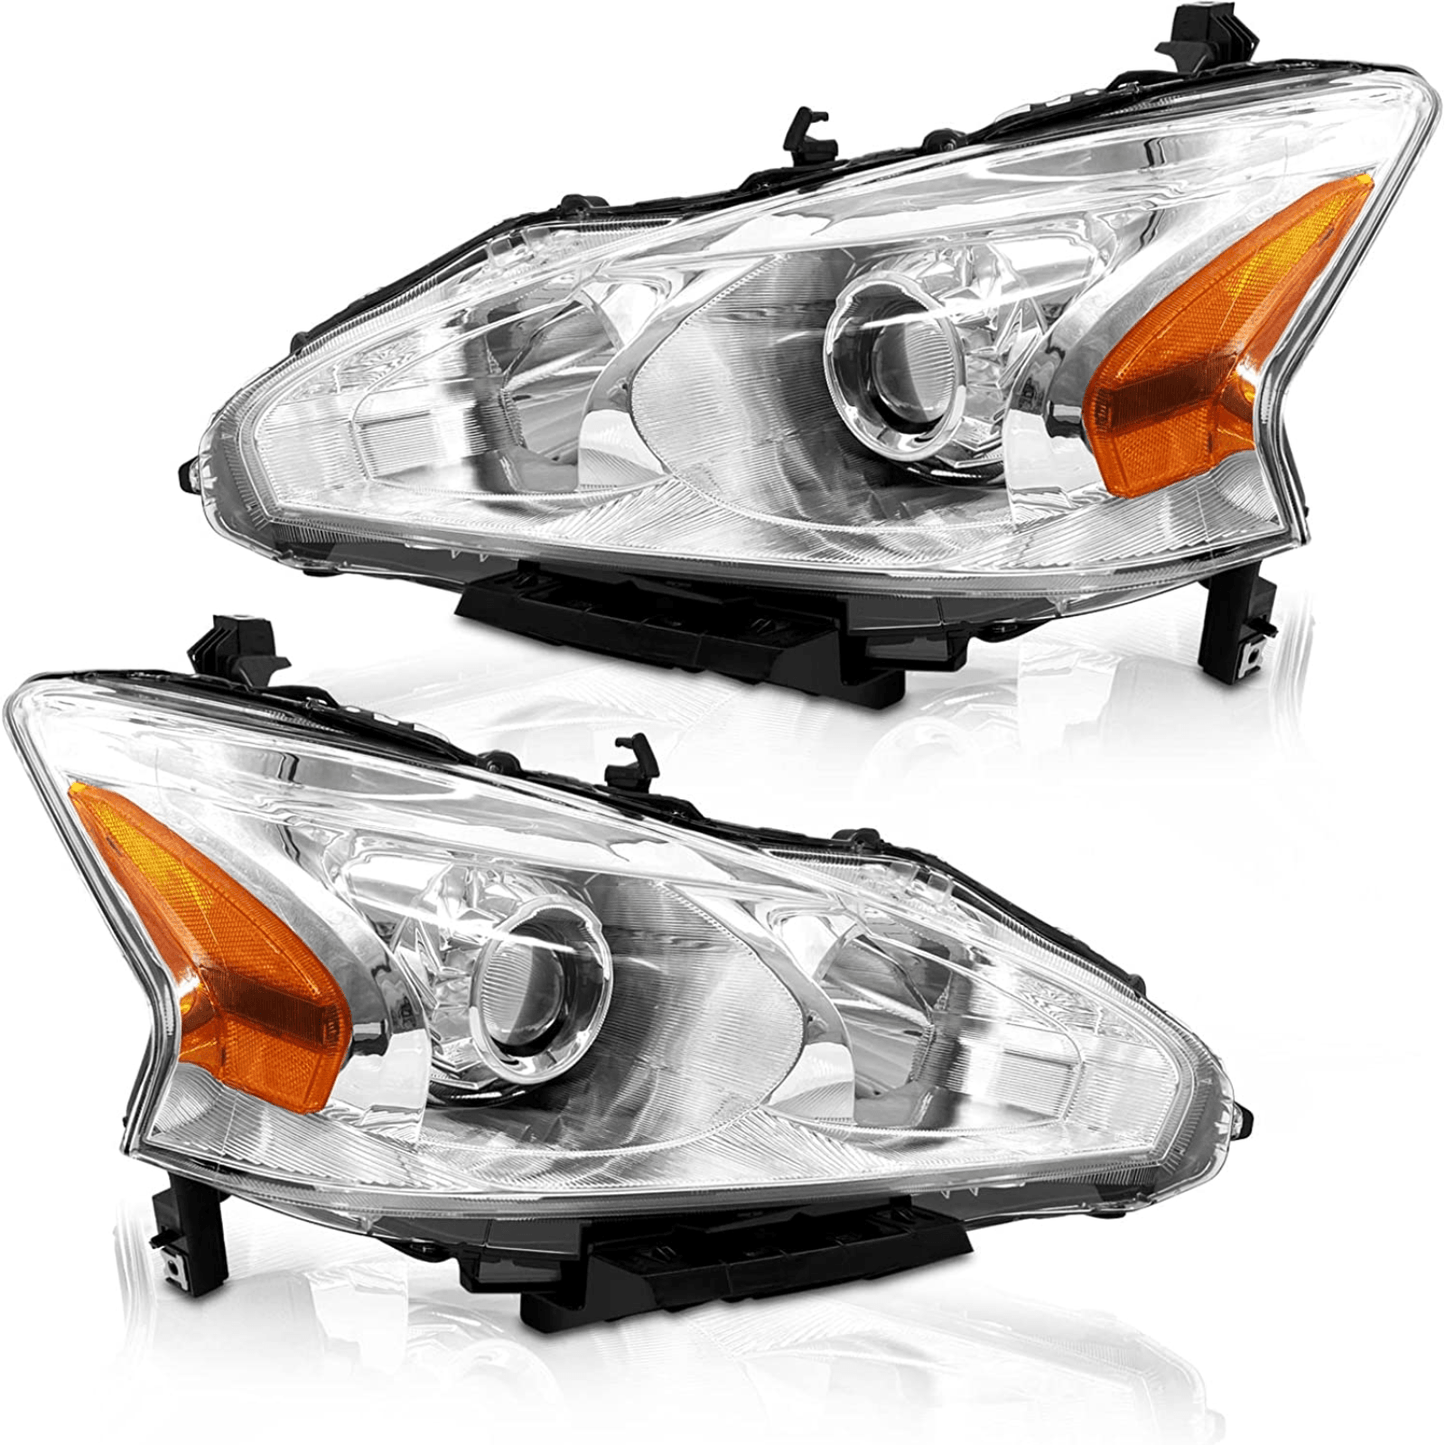 Headlights for 2013 2014 2015 Nissan Altima only fit 4 door driver and passenger side chrome housing clear lens - Goodmatchup